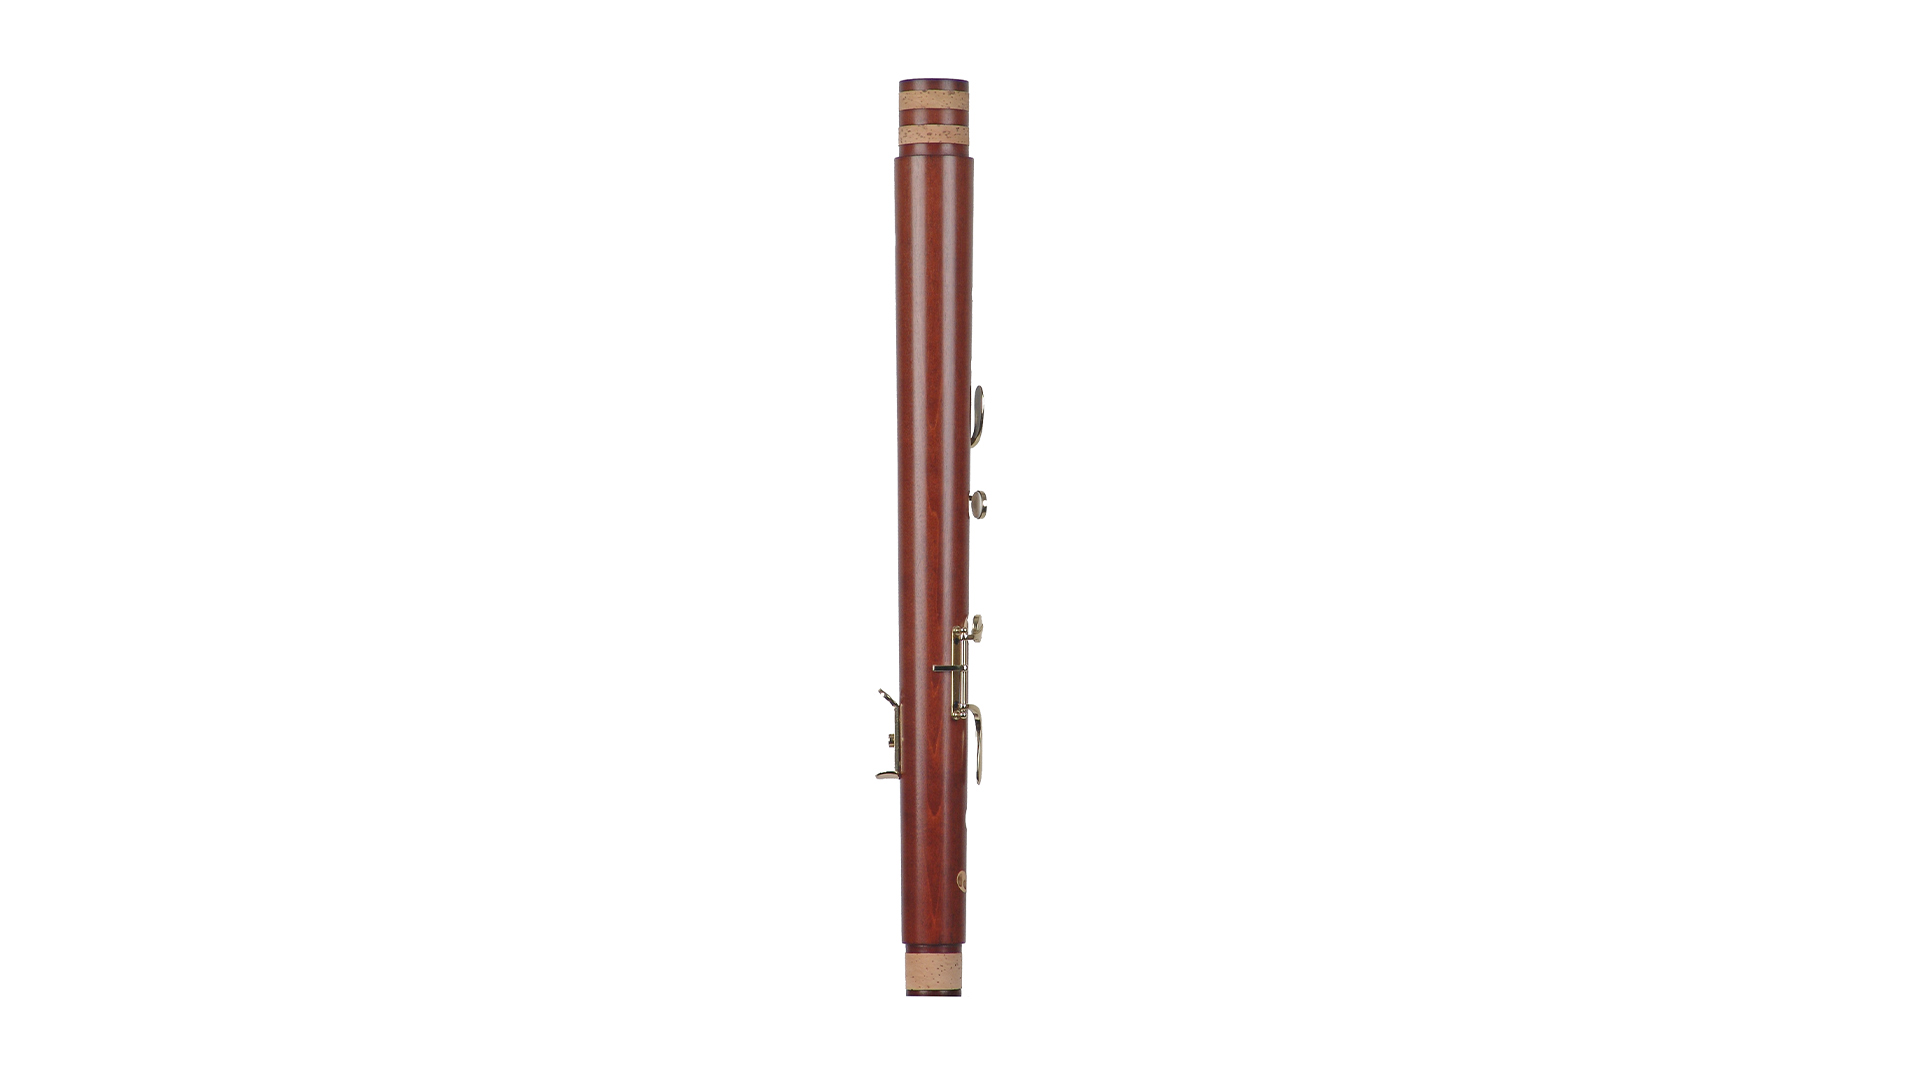 Moeck, "Rottenburgh", bass in f, middle joint single, baroque double hole, 415 Hz, maple stained